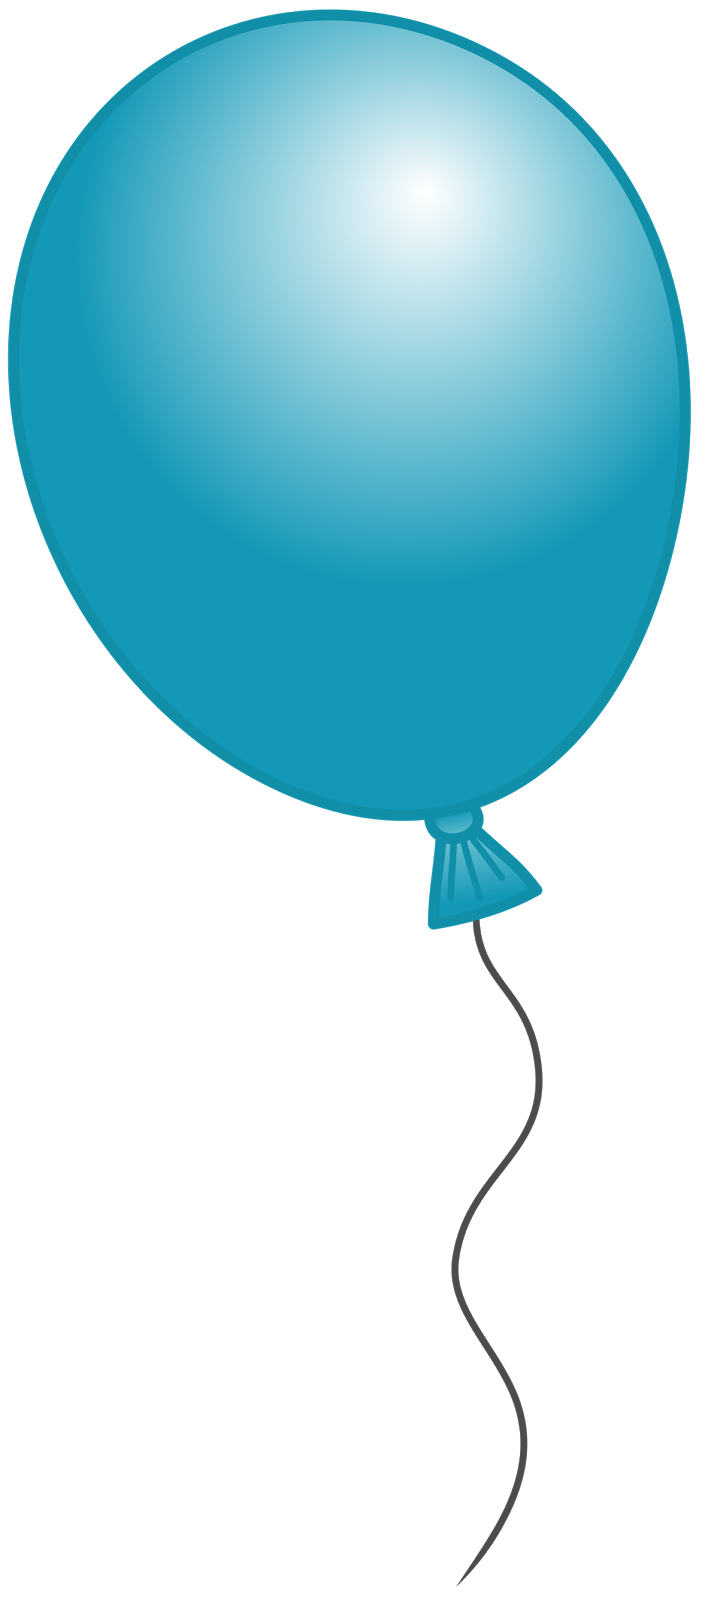 Free Birthday Balloon Images Hd Photo Clipart